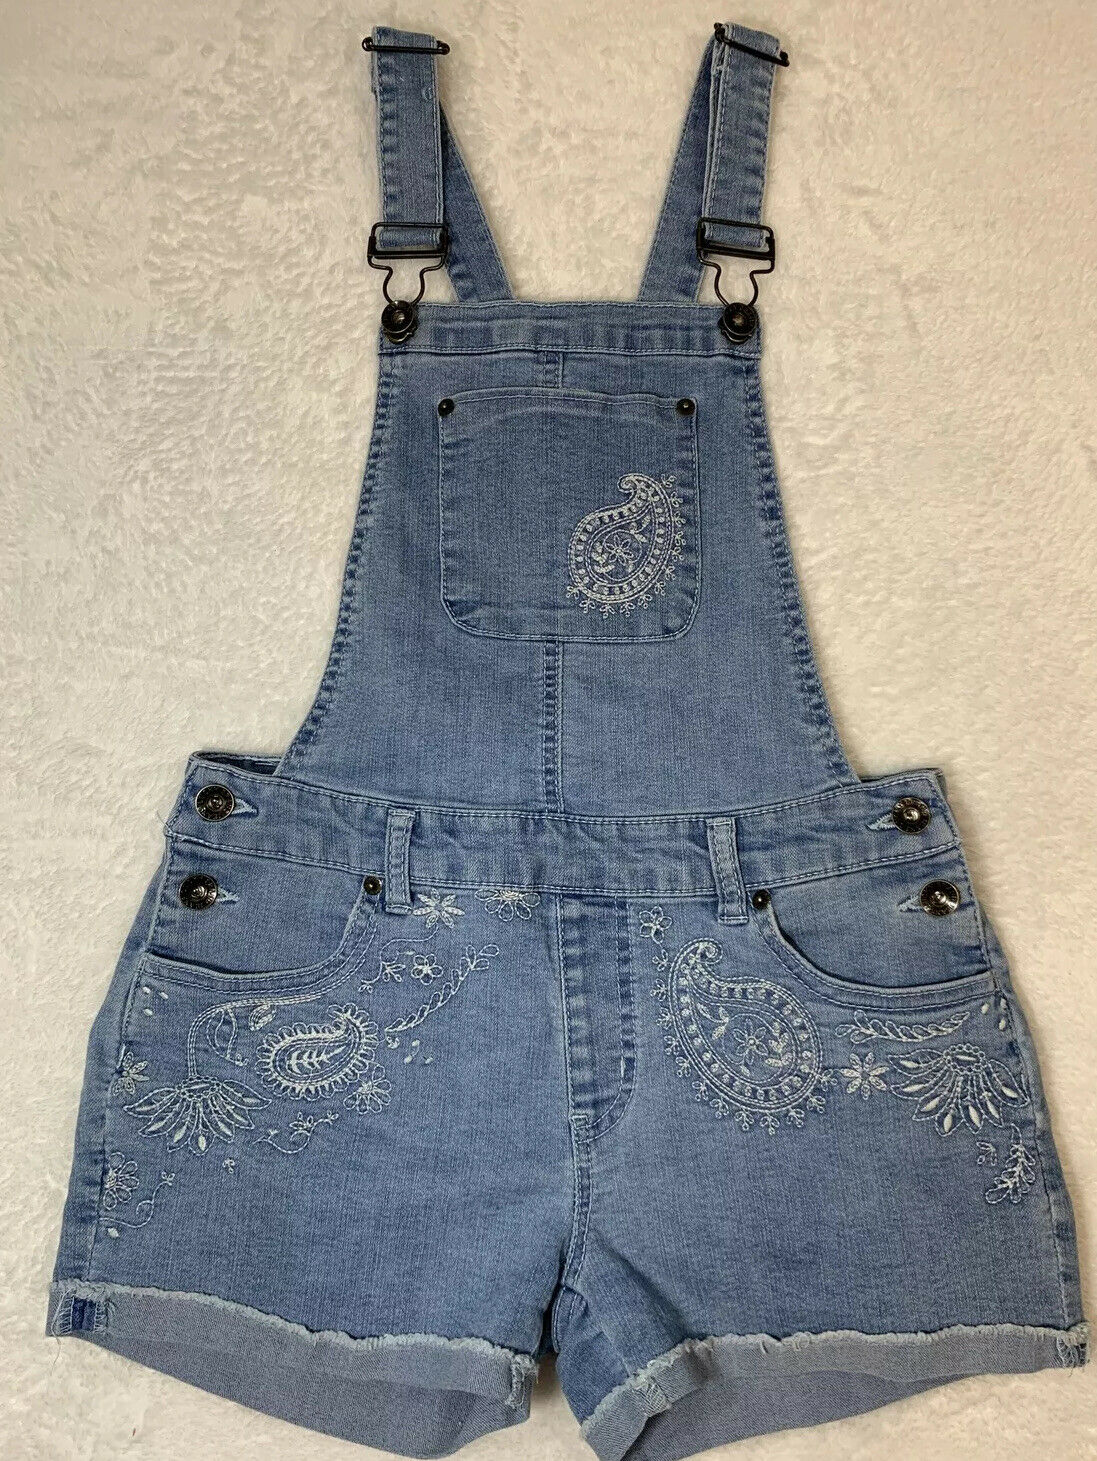 Lucky Brand Overalls Shortalls Size 14 Girls Embroidered Denim Jeans Cuffed